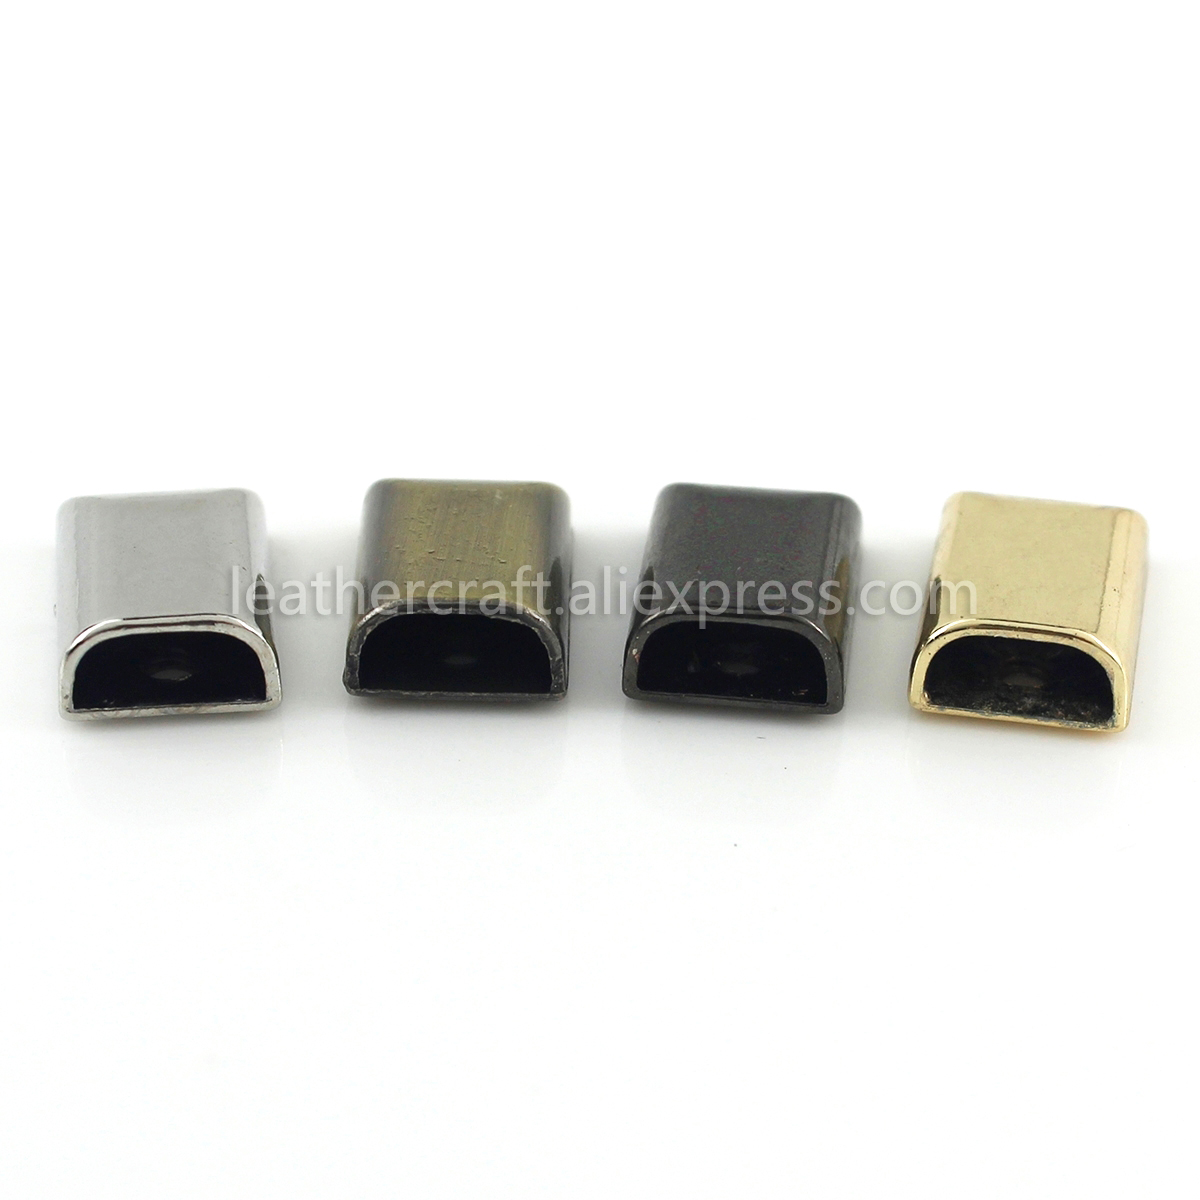 10pcs Metal Zipper Stopper Zipper Tail Clip Stop Tail Plug Head with Screw DIY bag Leather Hardware Leather Craft 17mm(11/16")